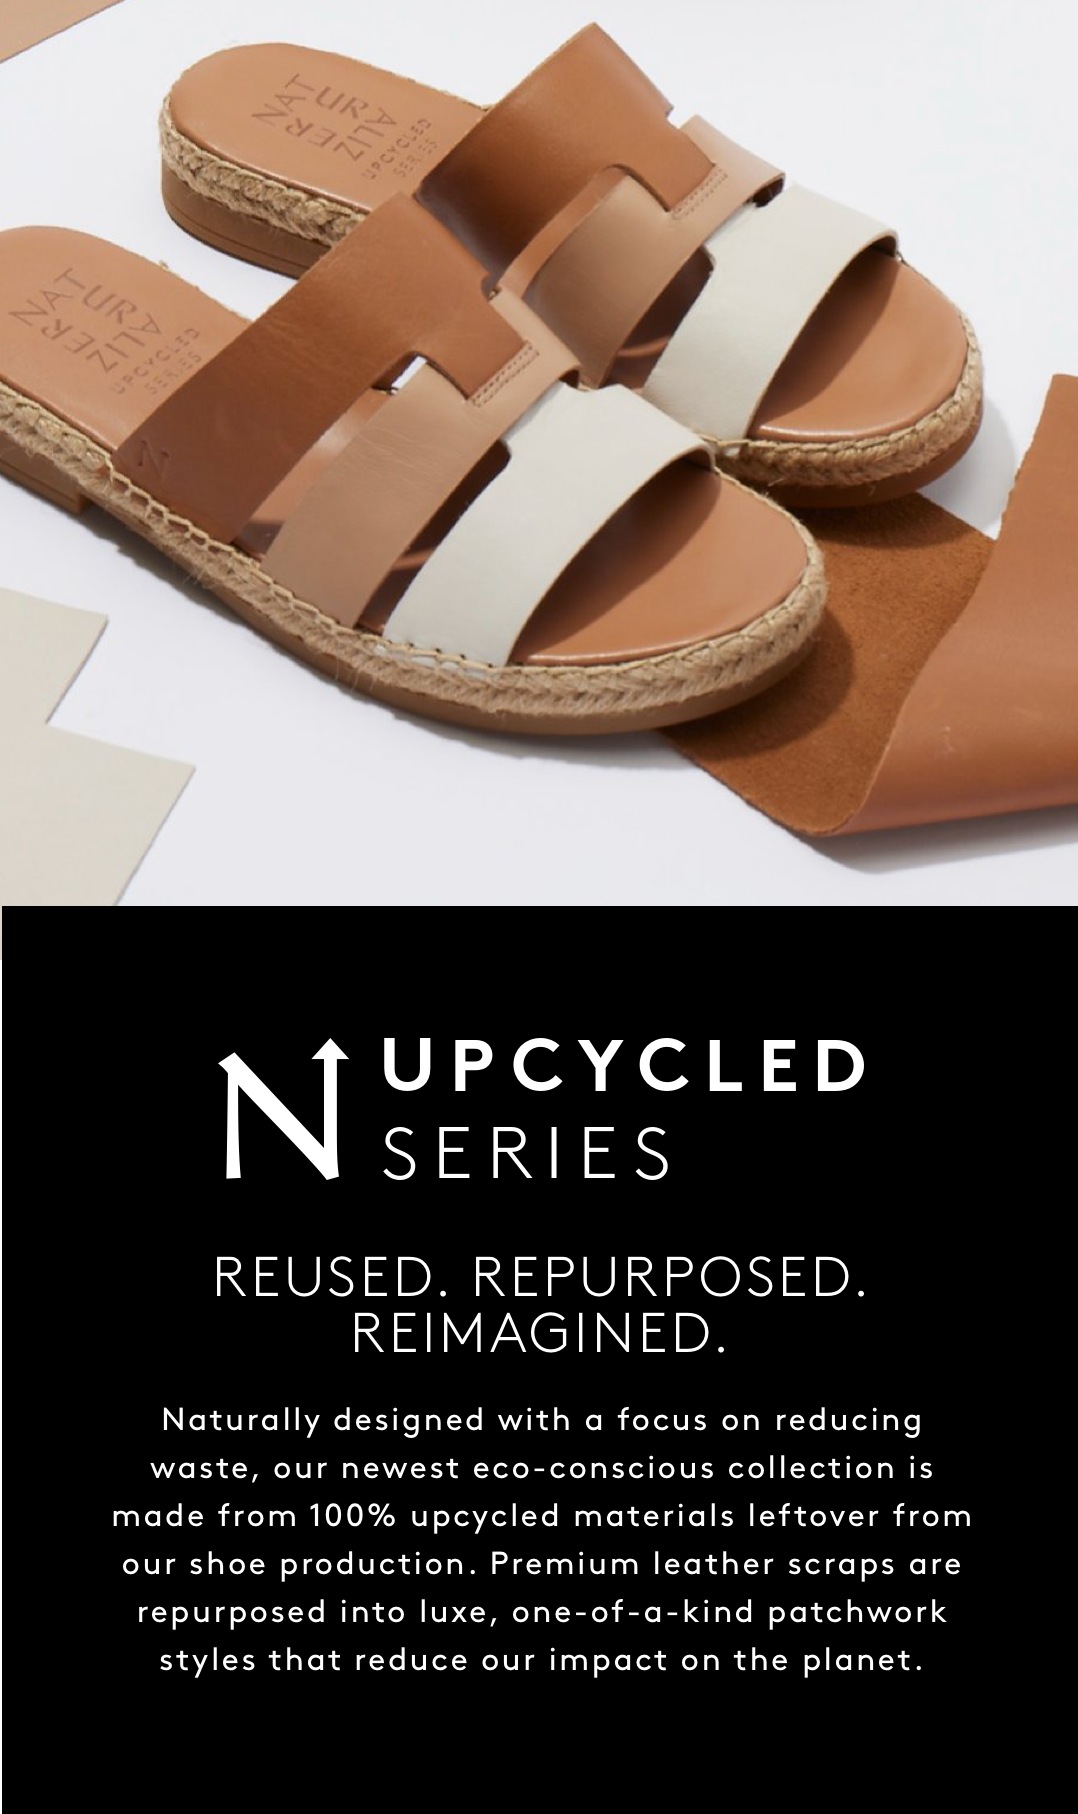 UPCYCLED SERIES. REUSED. REPURPOSED. REIMAGINED. Naturally designed with a focus on reducing waste, this eco-conscious collection is made from 100% upcycled materials leftover from our shoe production. Premium leather scraps are repurposed into luxe, one-of-a-kind patchwork styles that reduce our impact on the planet.